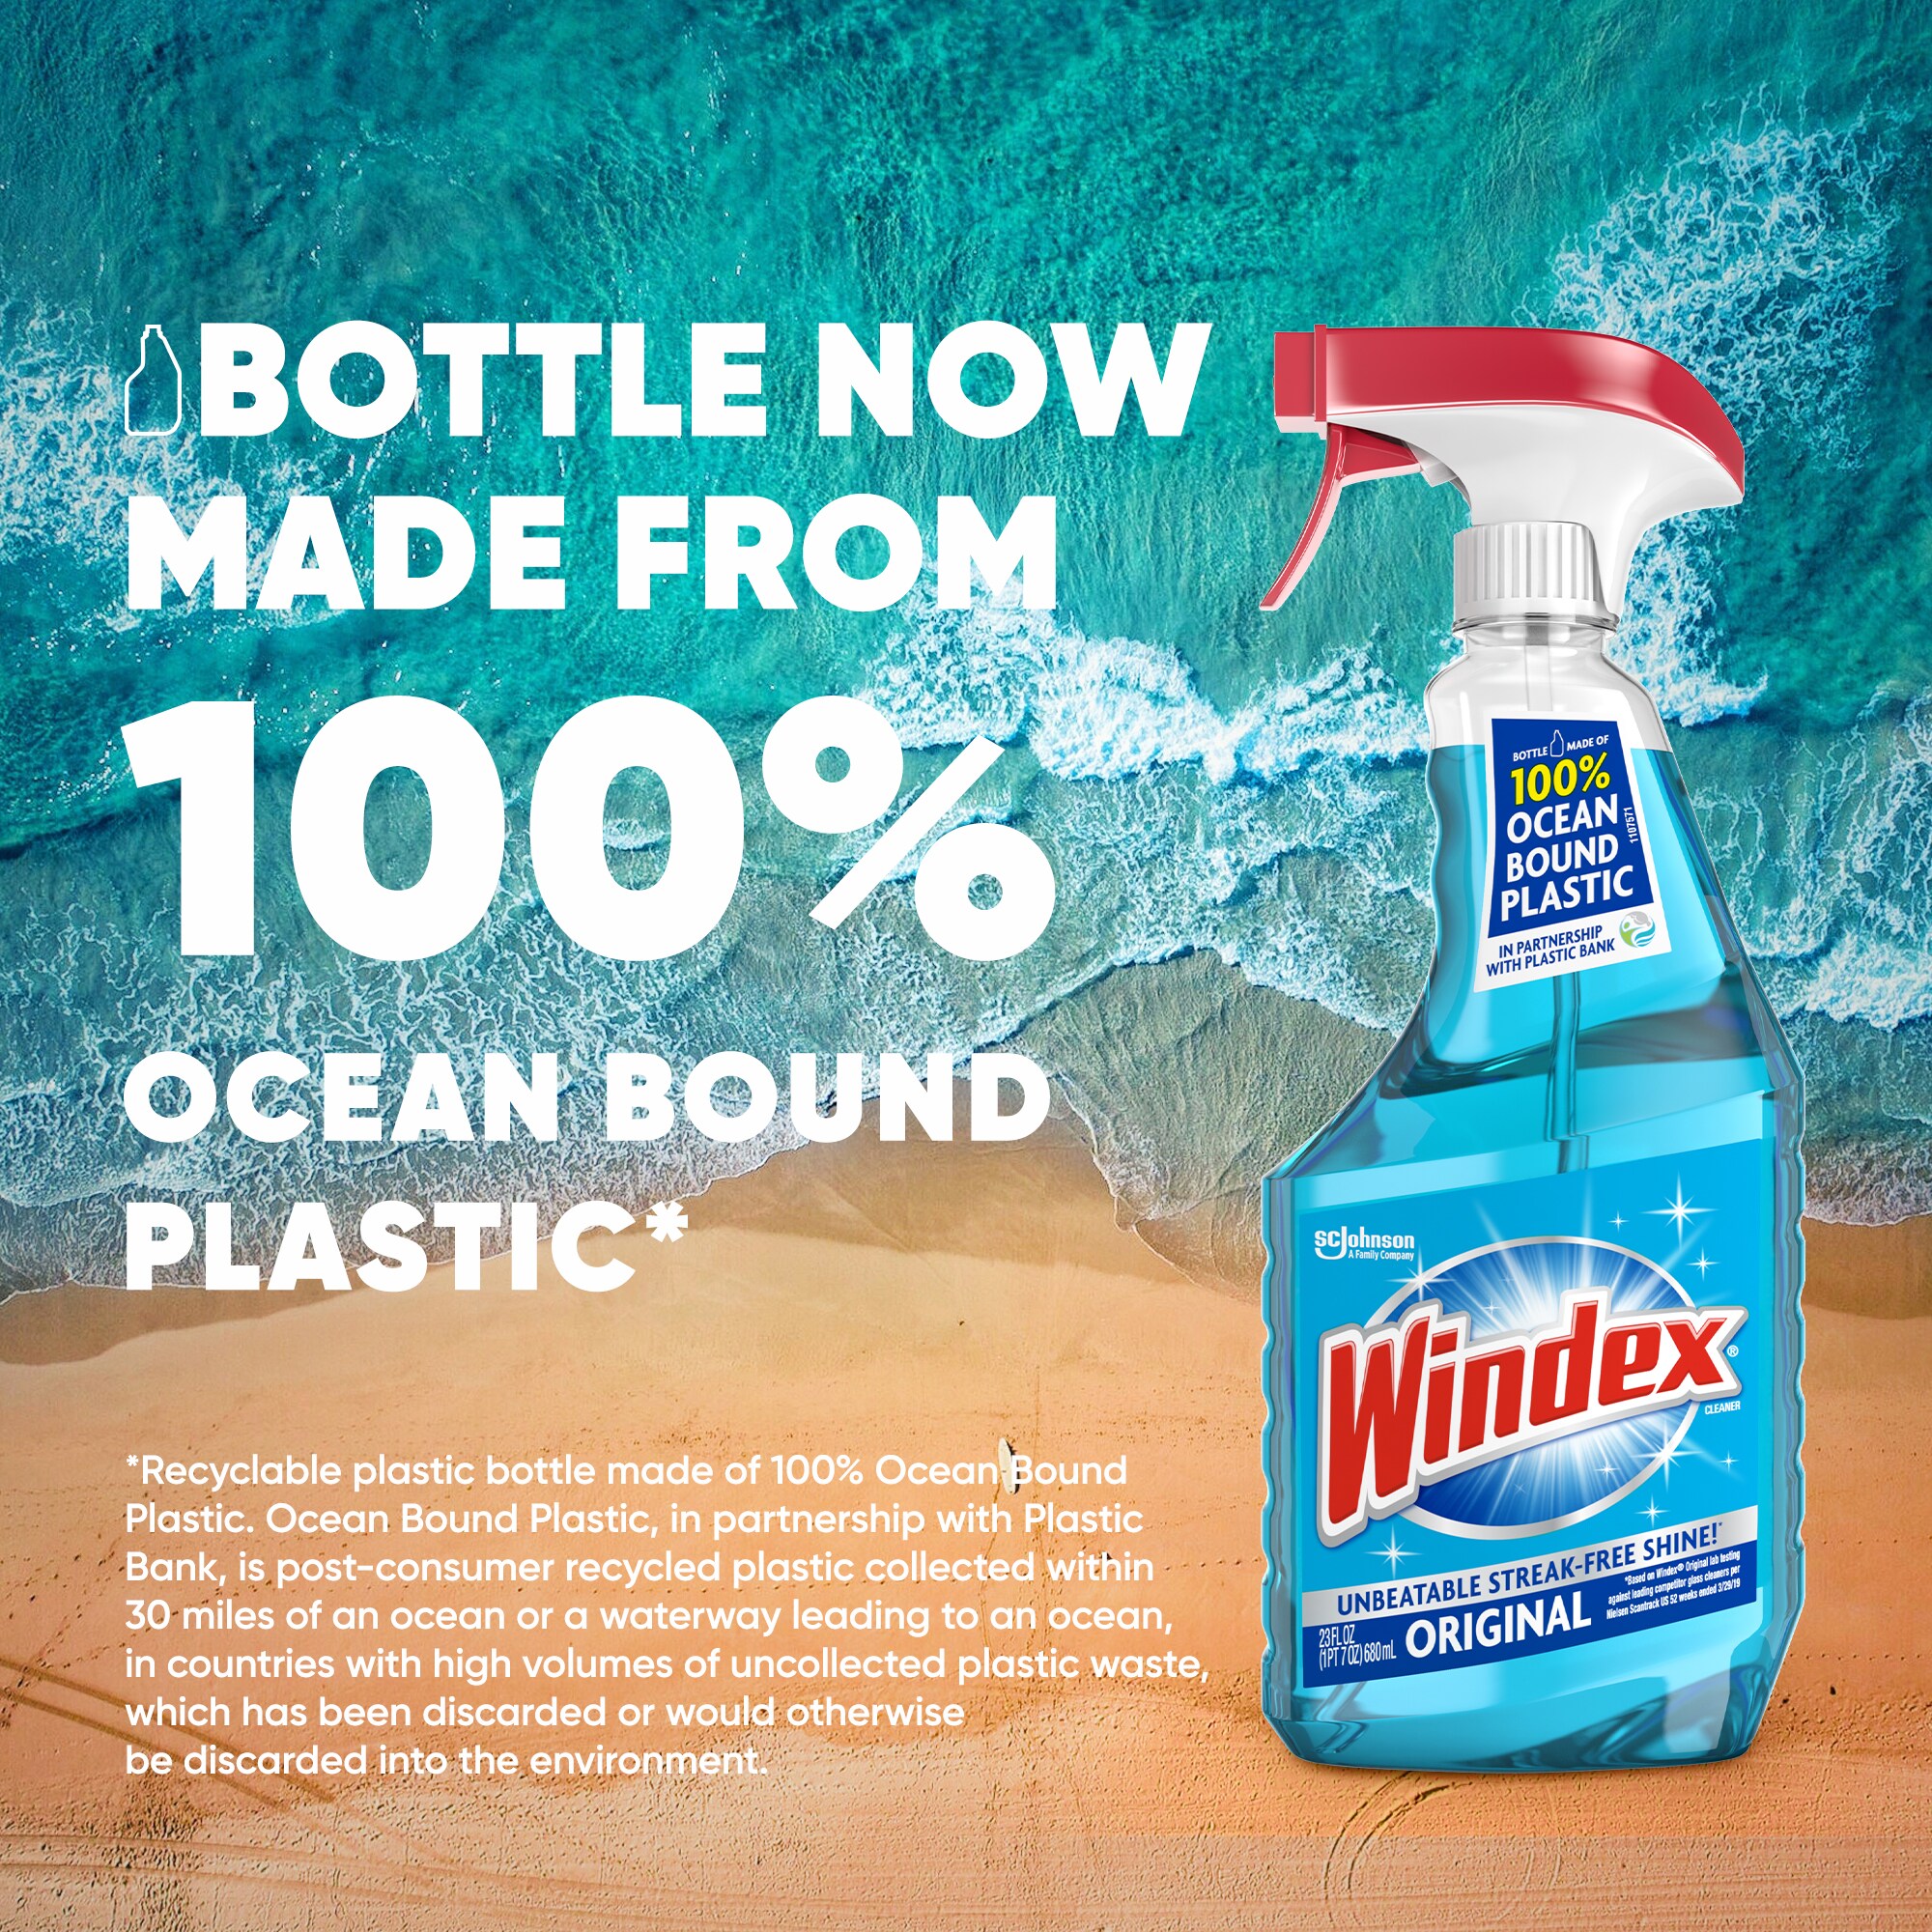 Windex Glass Cleaner, Pledge Furniture and Multisurface Wipes Bundle